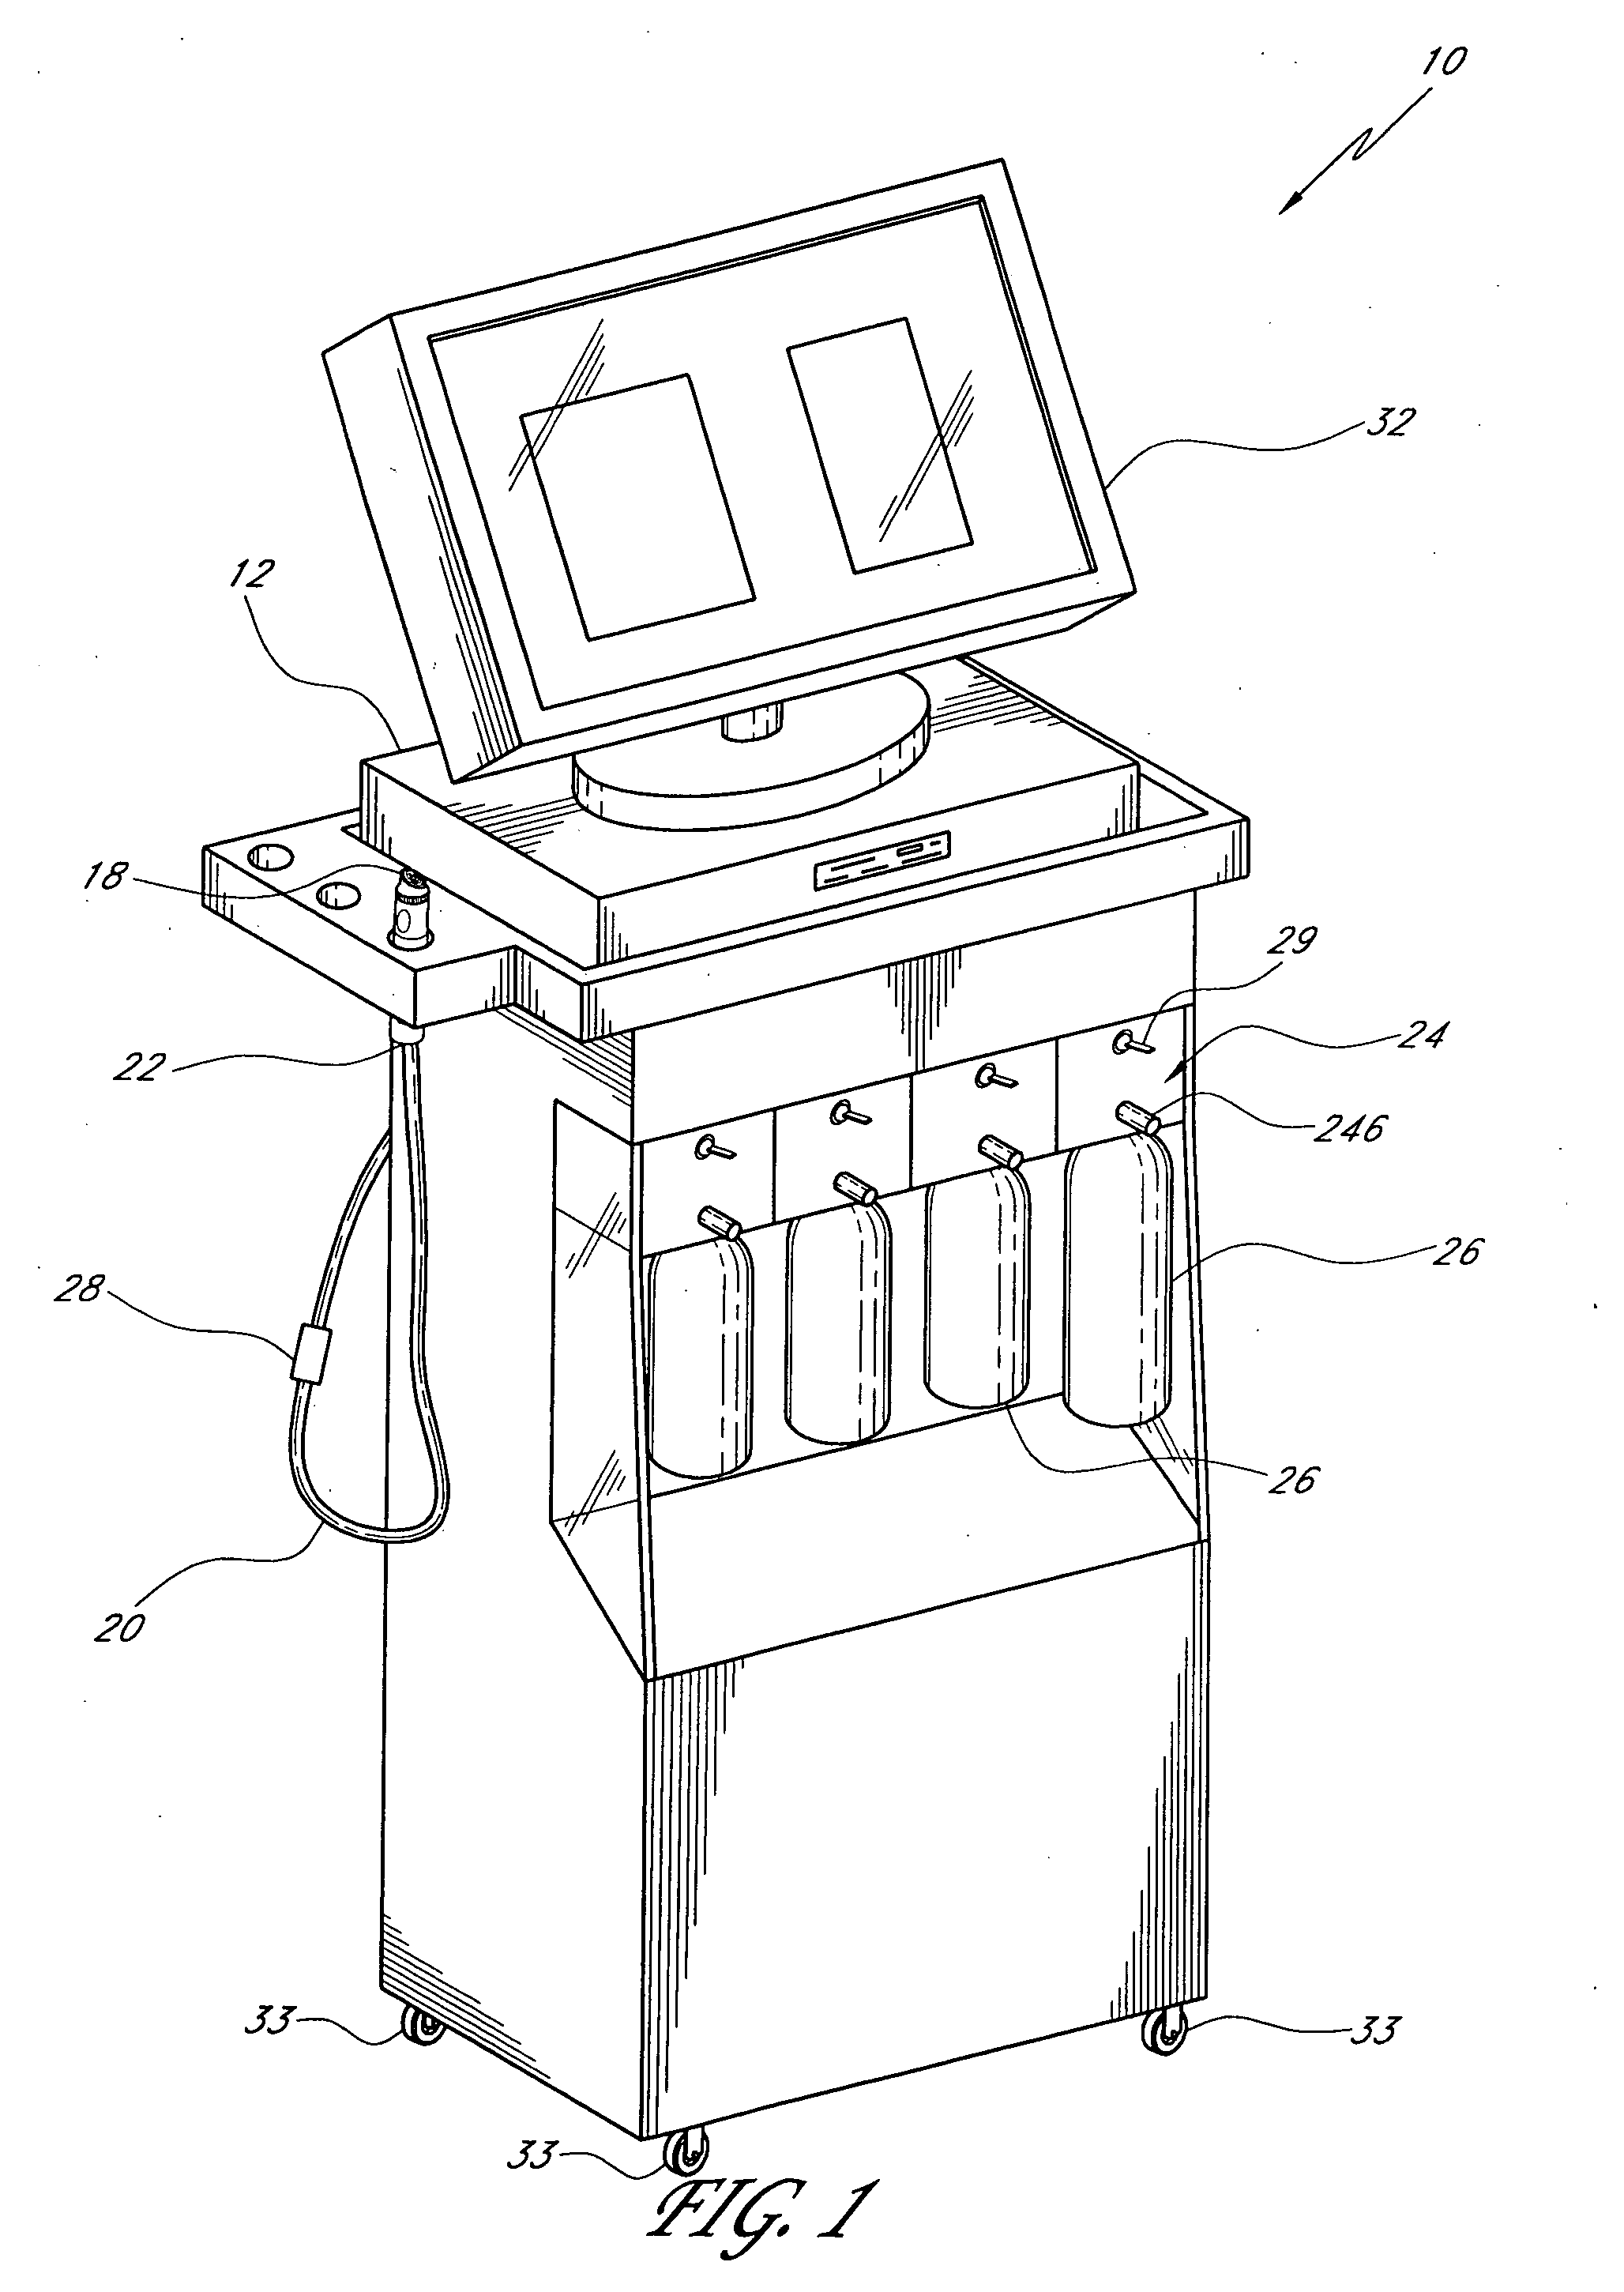 Apparatus and methods for treating the skin